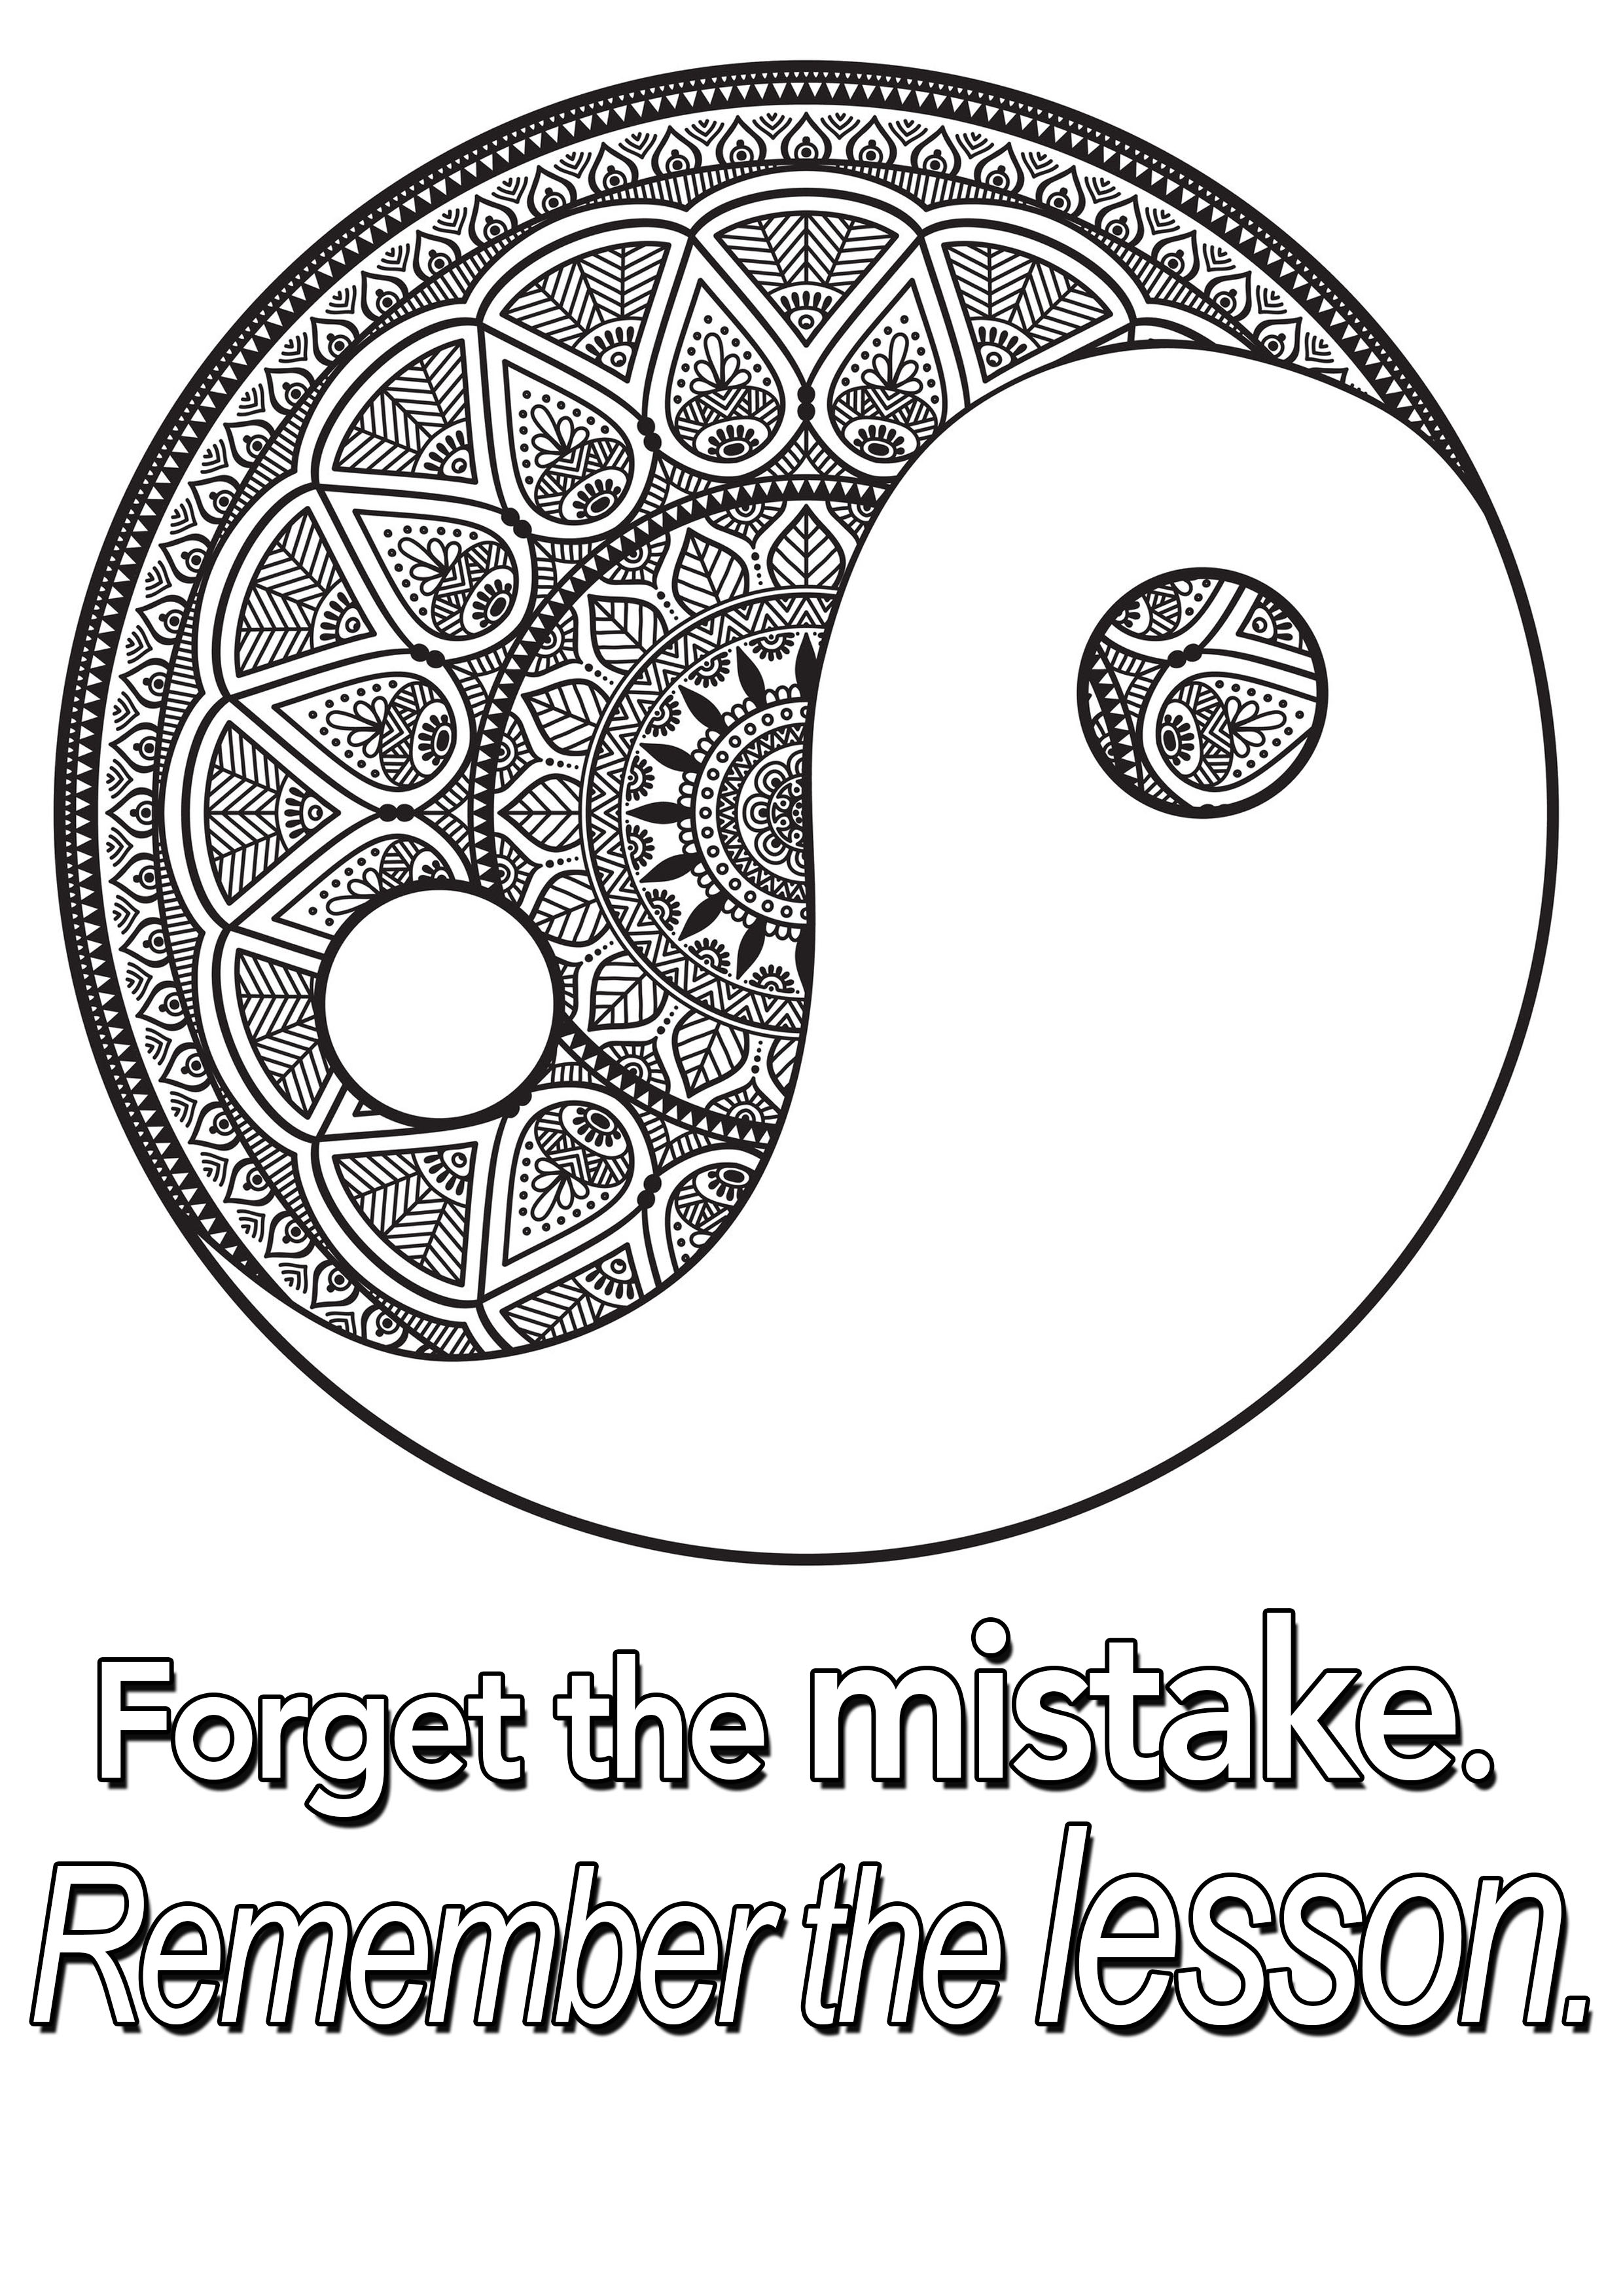 'Forget the mistake. Remember the lesson.' : A quote to color, with a Yin & Yang symbol full of beautiful patterns